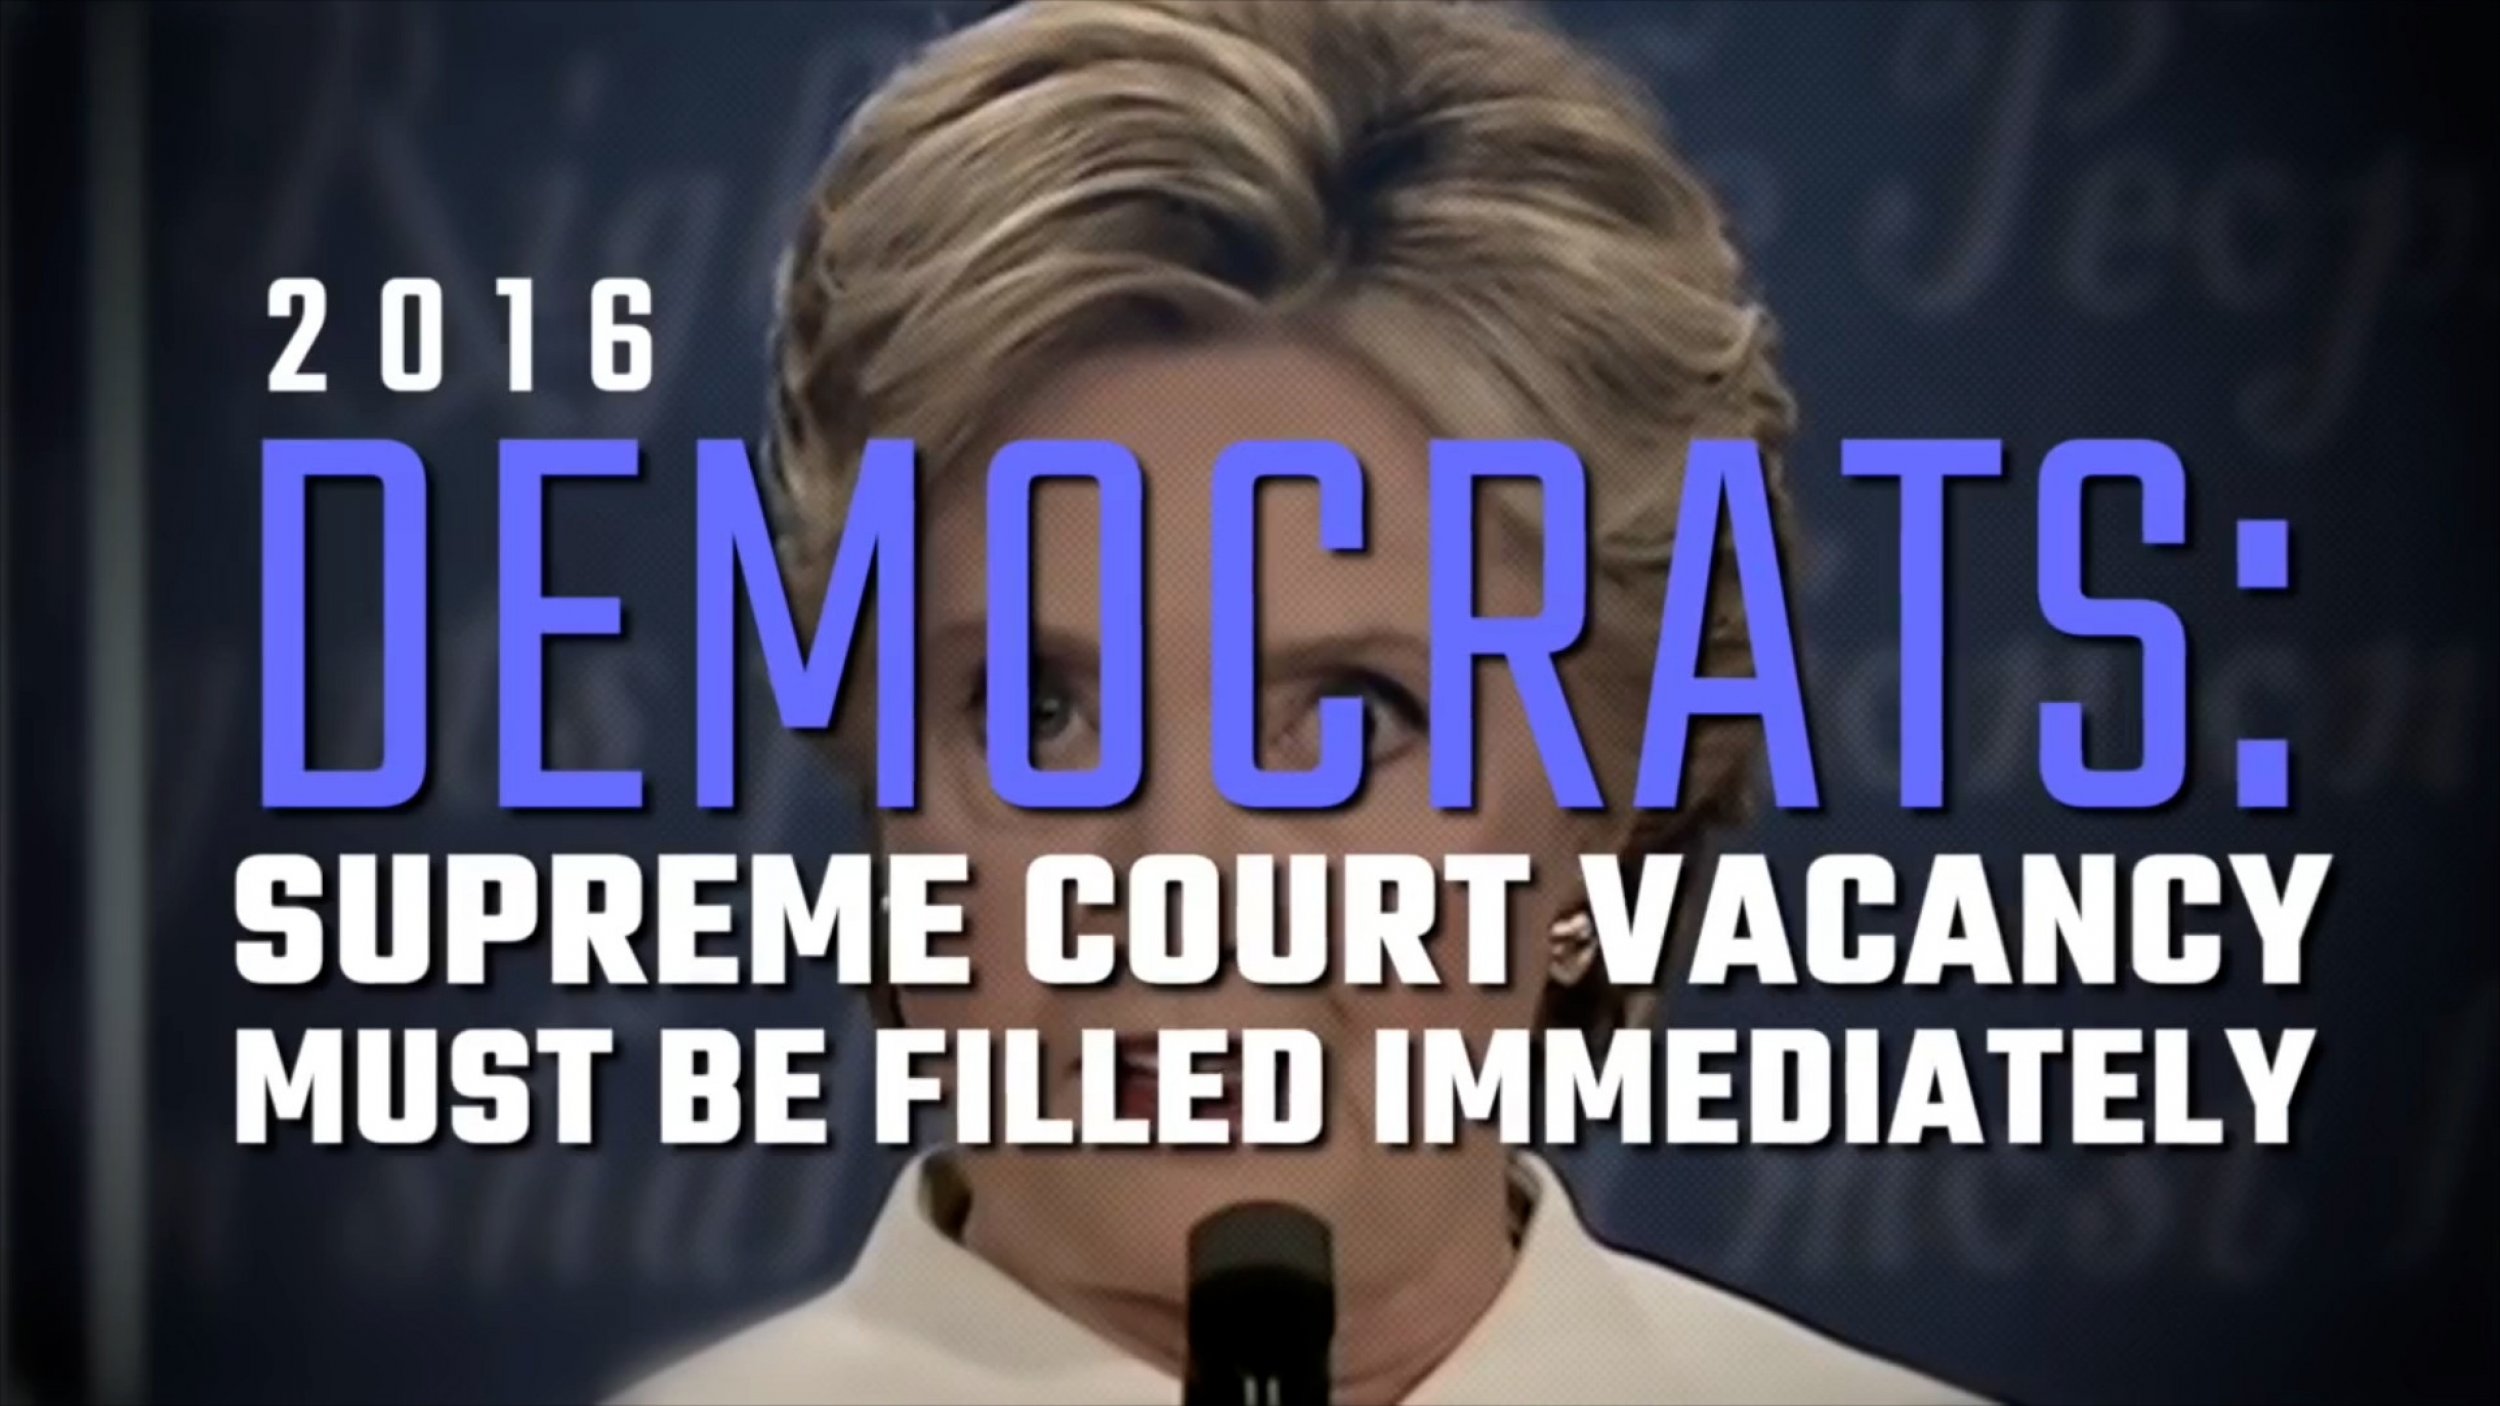 GOP Releases Ad Of Democrats Calling For Supreme Court Vacancy To Be Filled